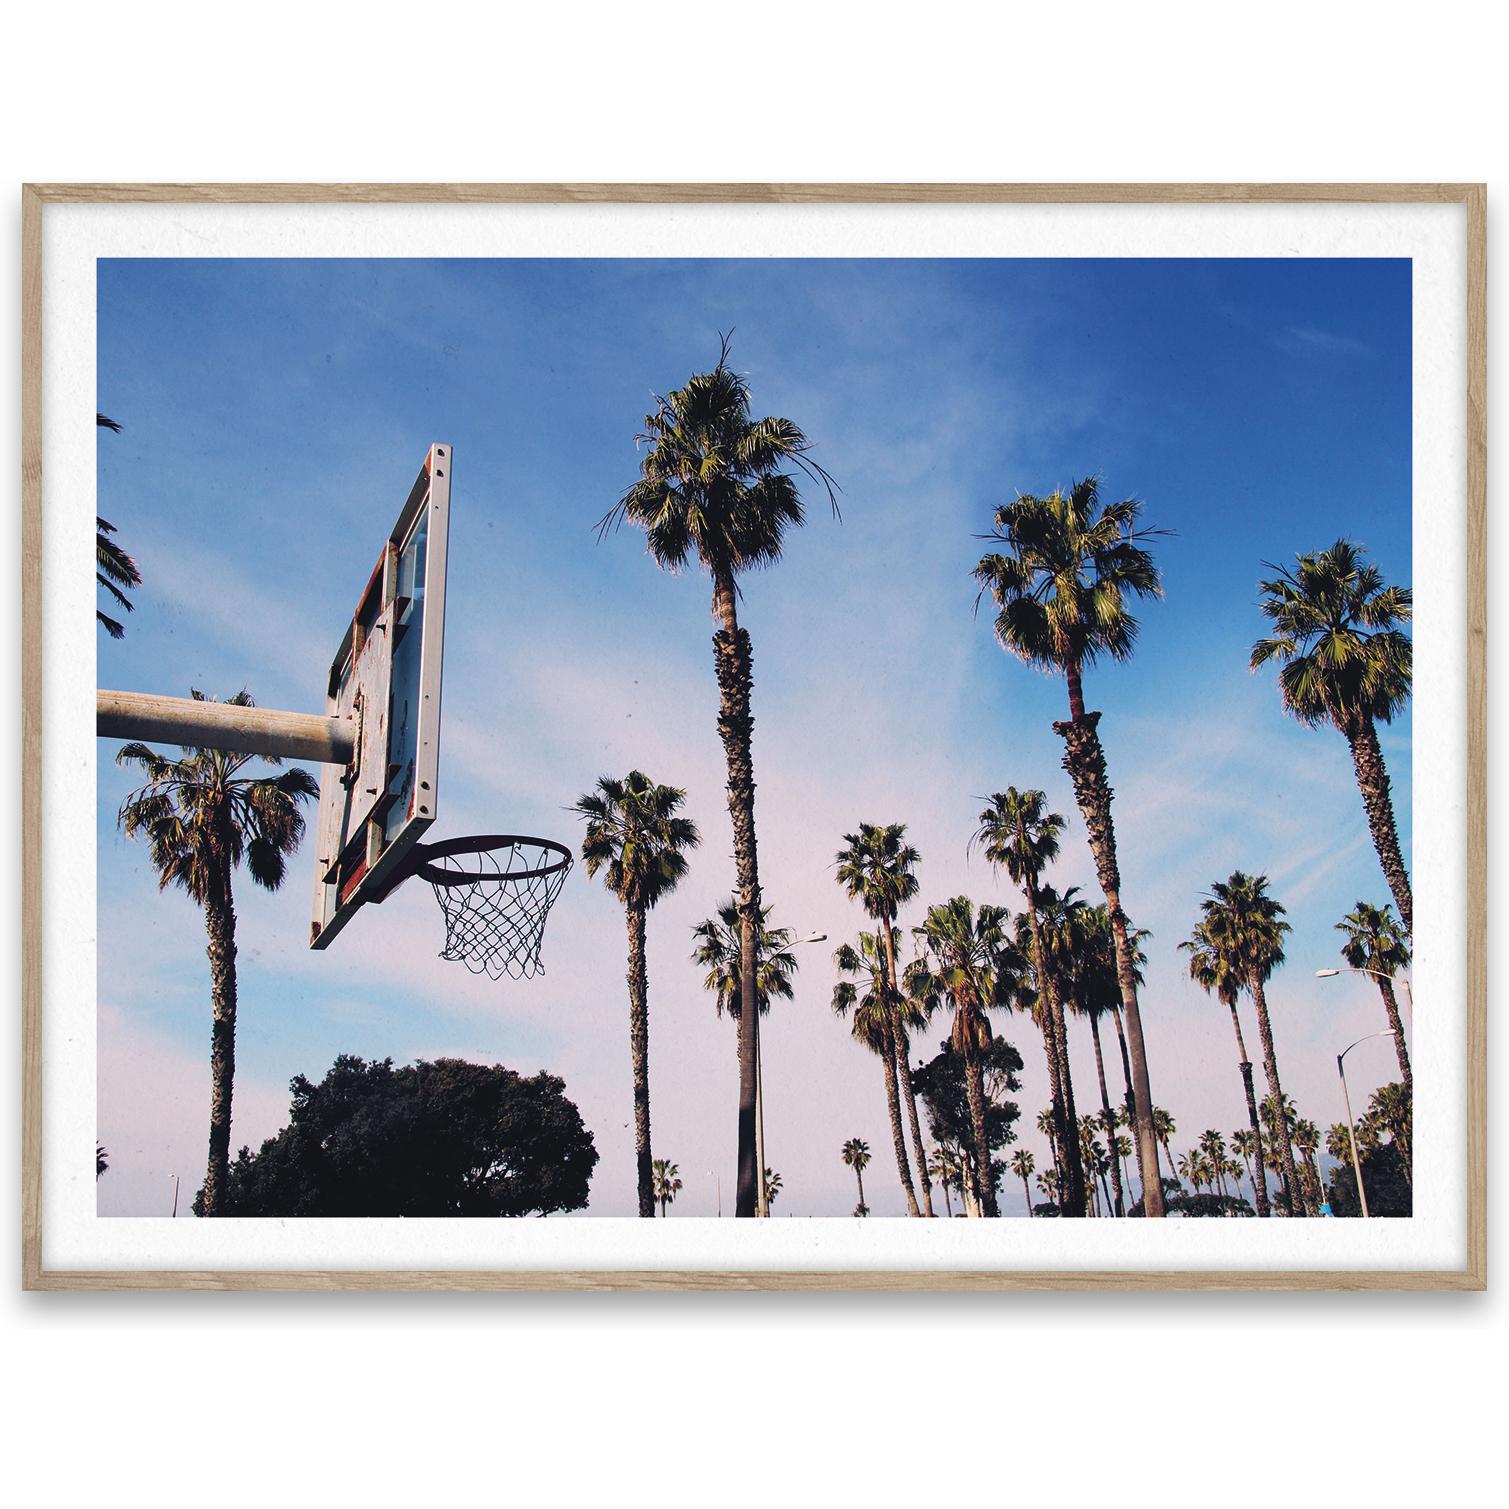 Paper Collective Cities of Basketball 02, Los Angeles plakát, 30x40 cm